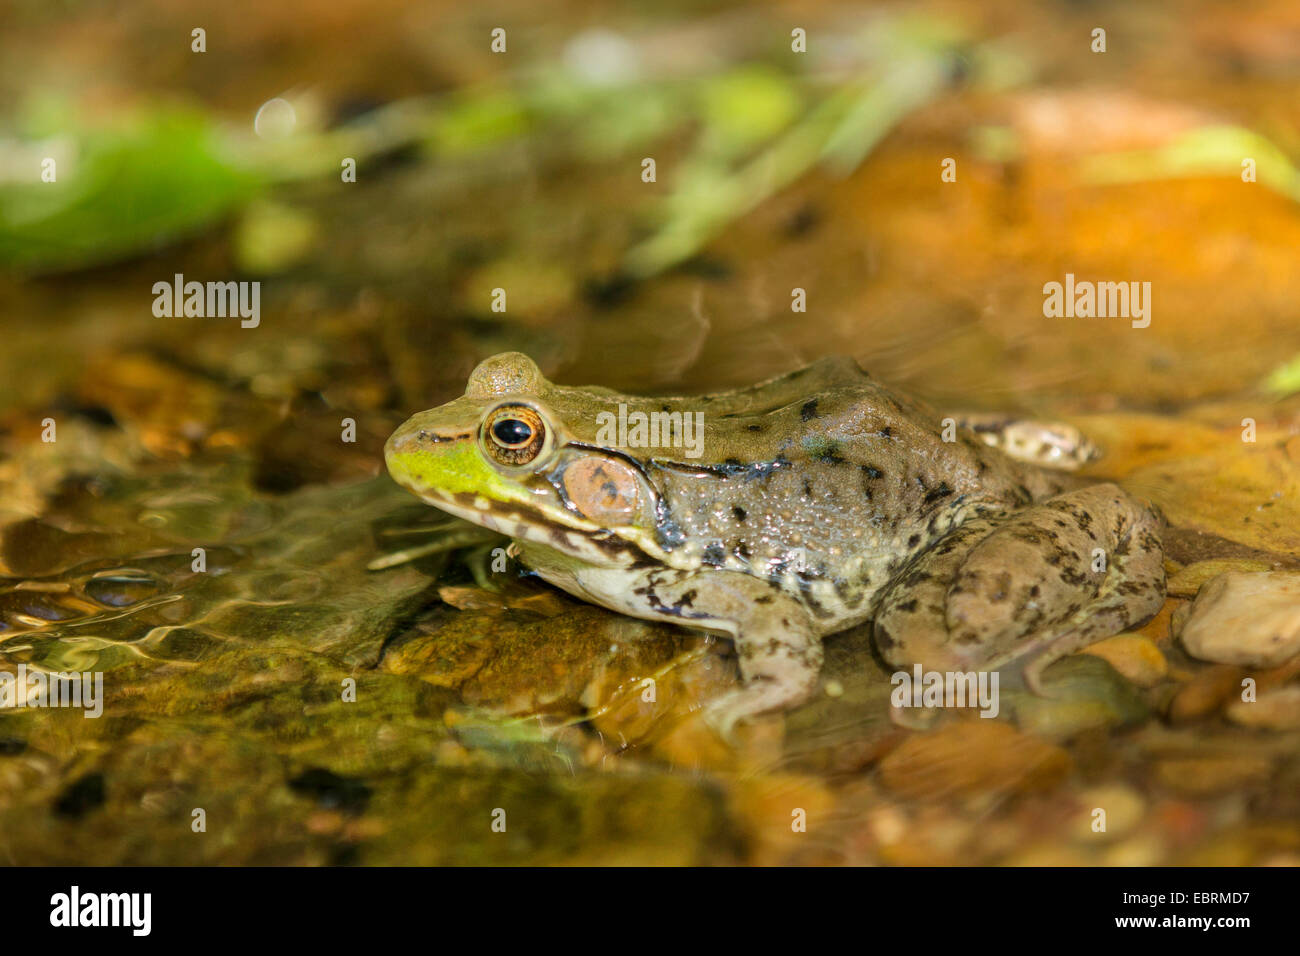 Rana verde, comune spring frog (Rana clamitans, Lithobates clamitans), si siede a brookside, USA, Tennessee, il Parco Nazionale di Great Smoky Mountains Foto Stock